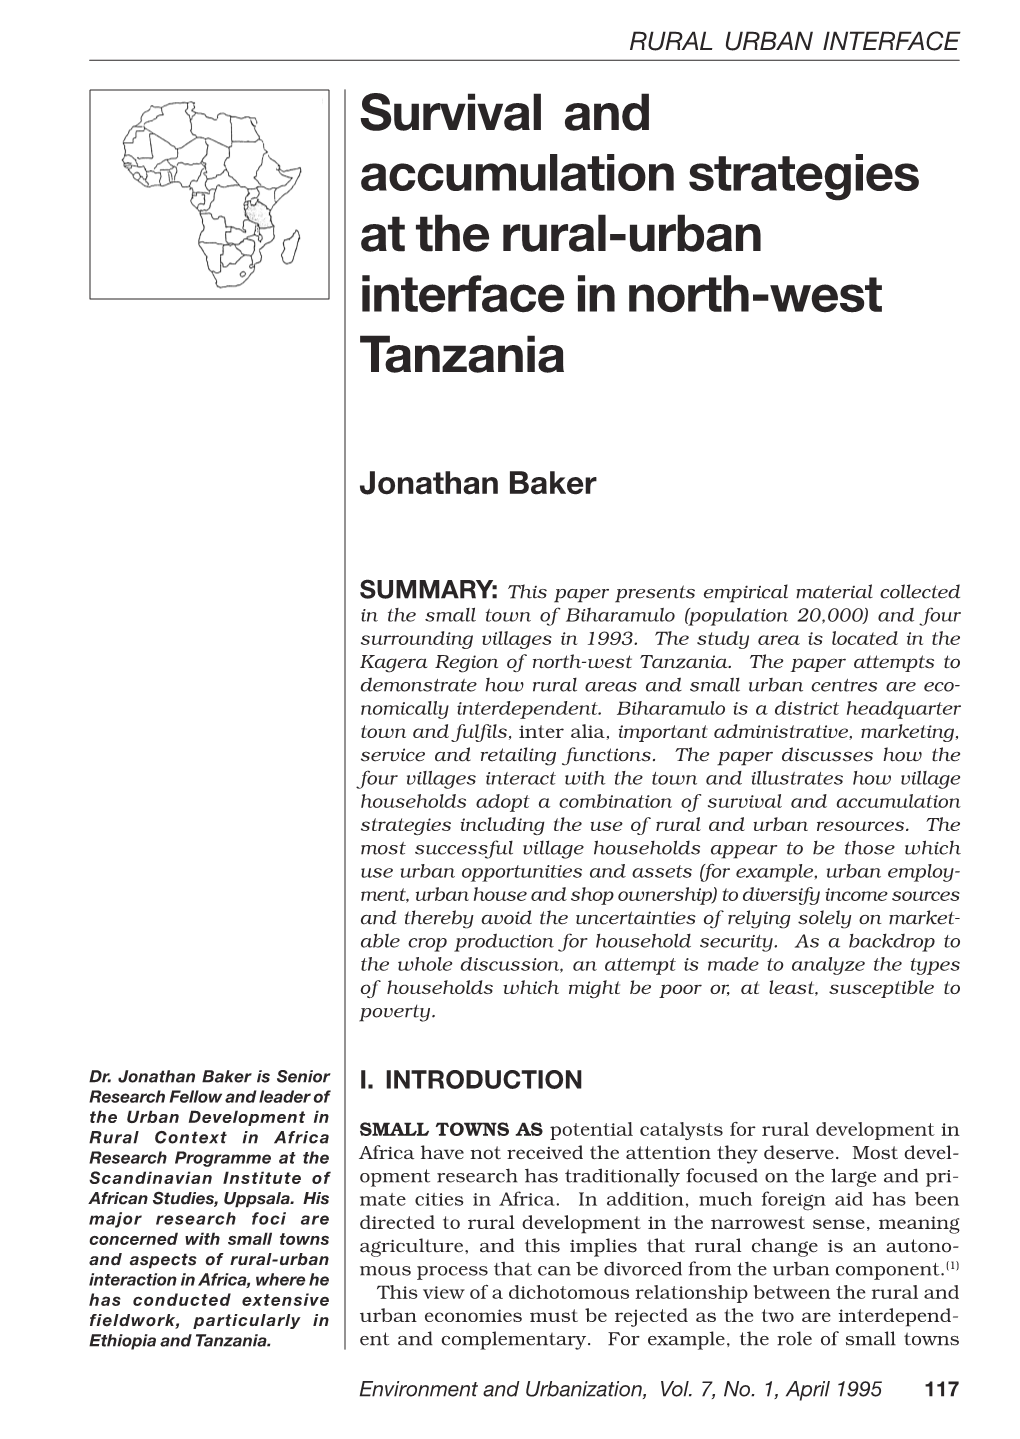 Survival and Accumulation Strategies at the Rural-Urban Interface in North-West Tanzania